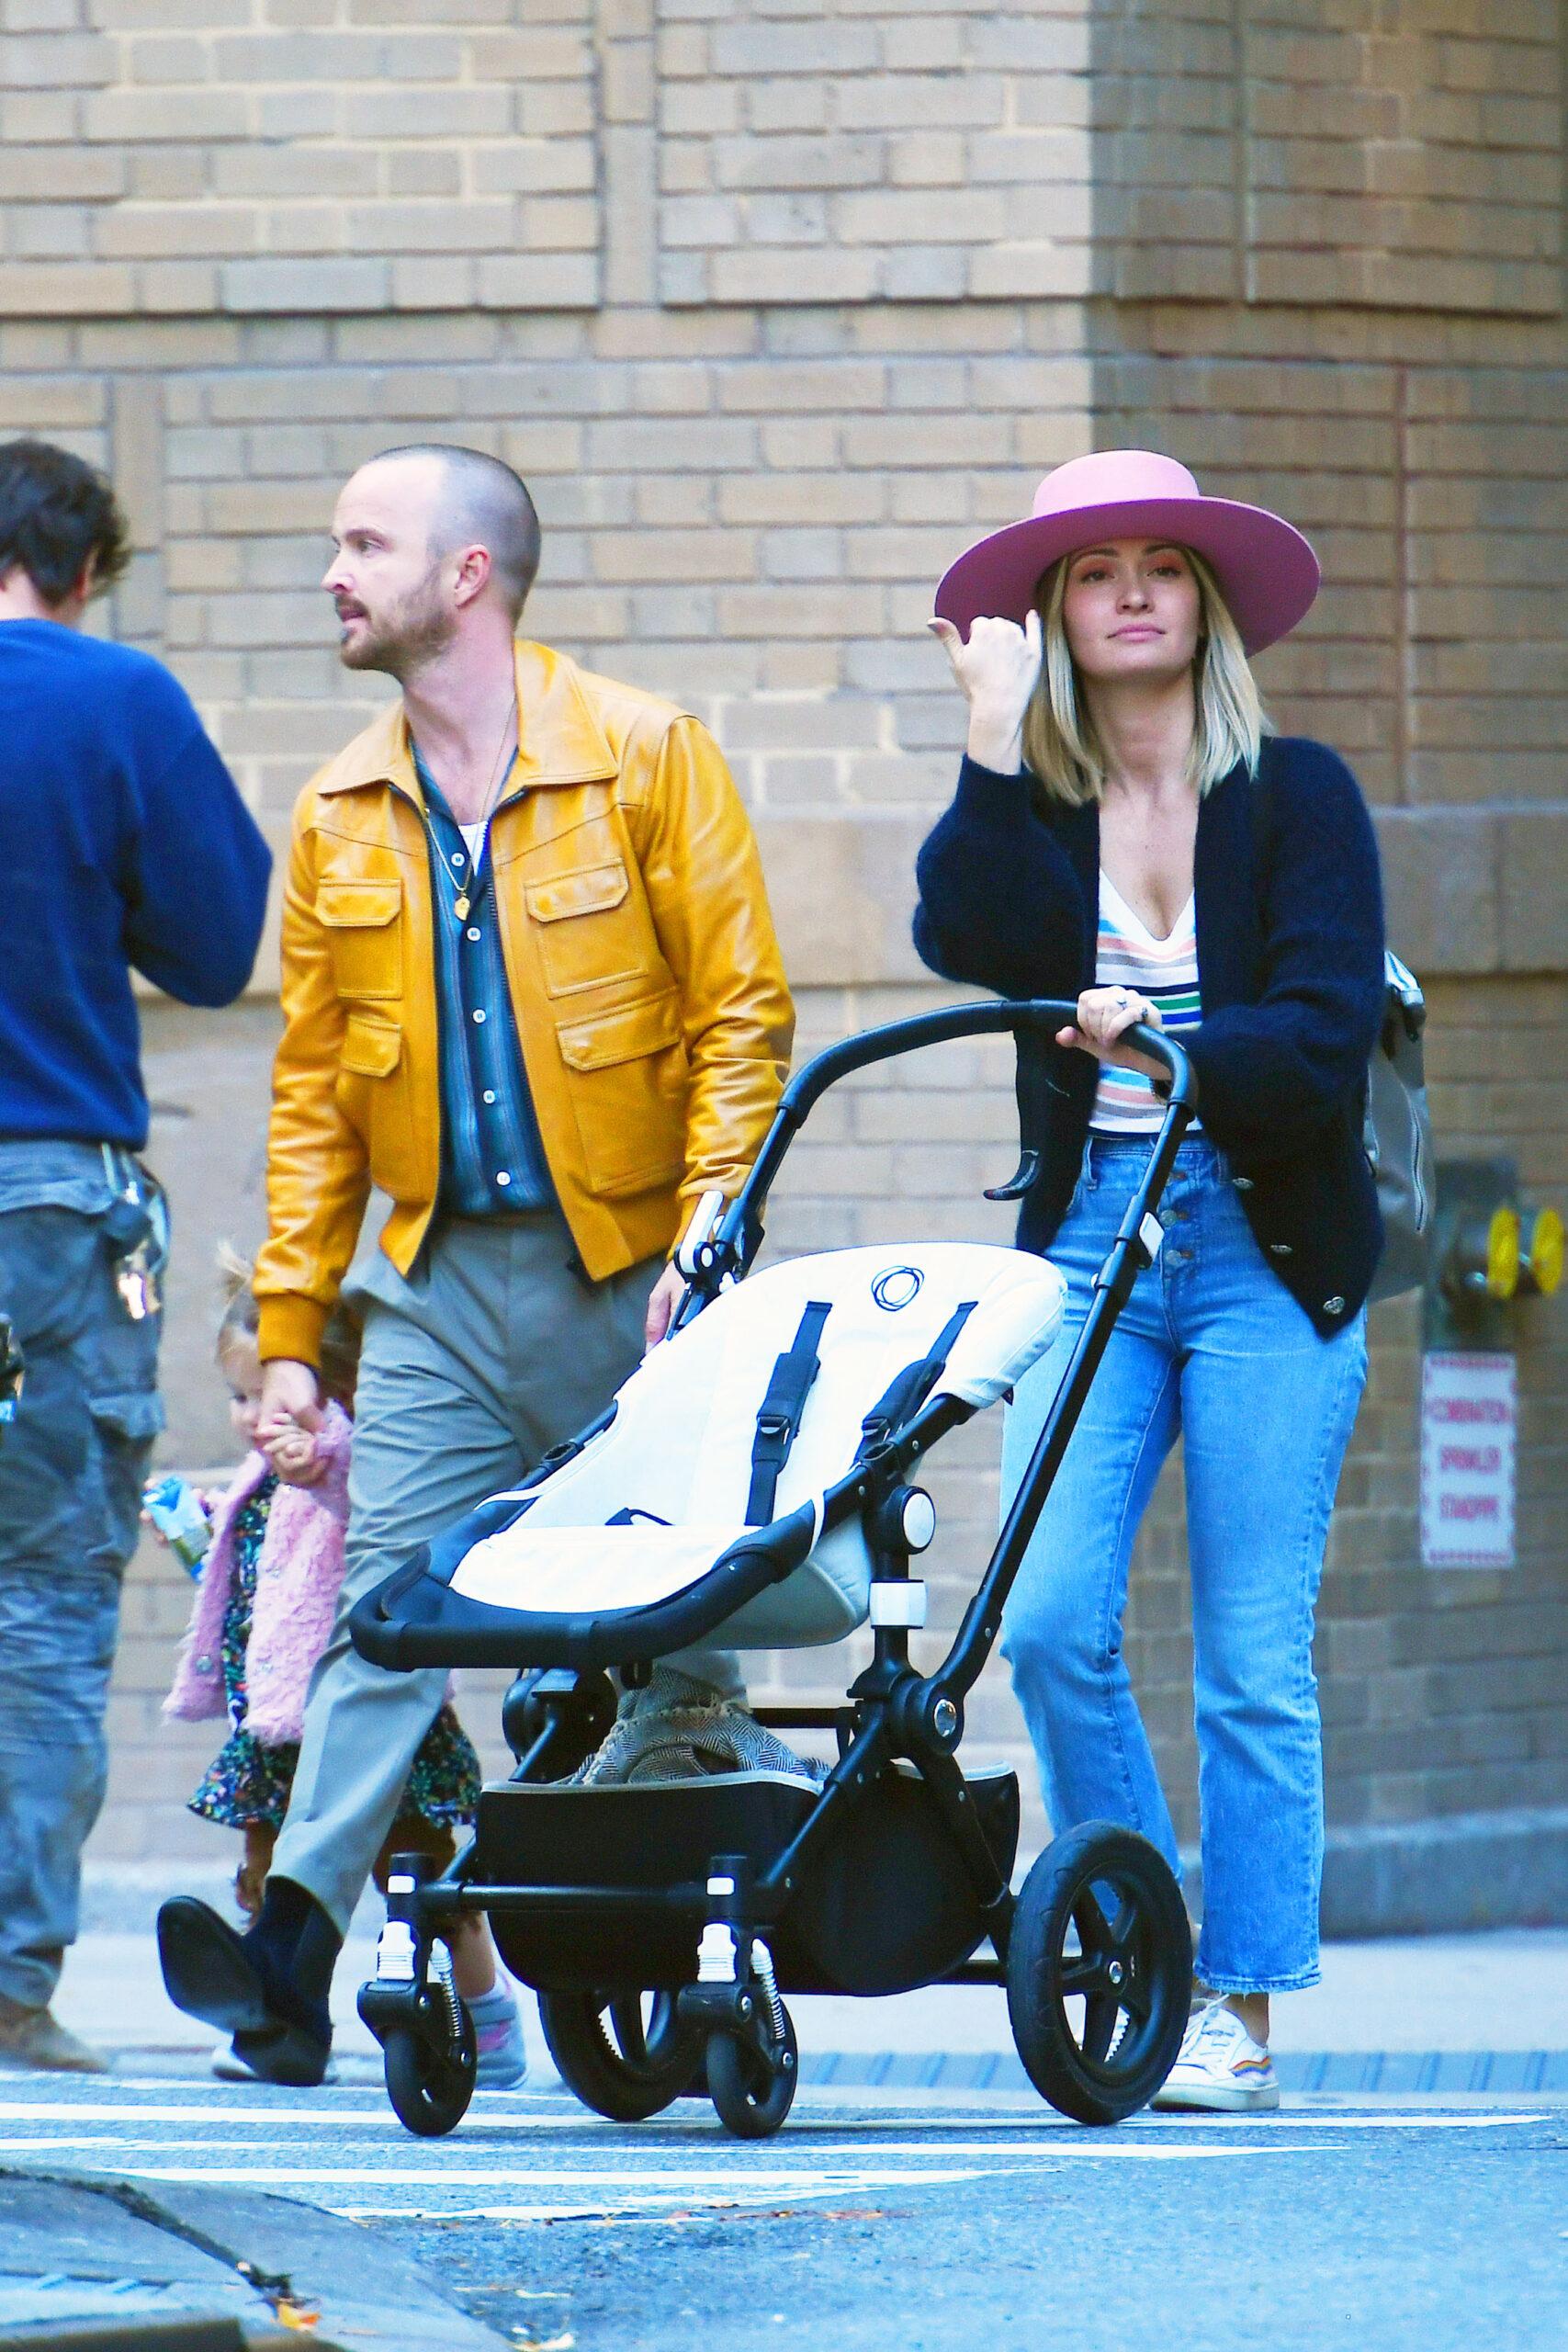 Aaron Paul out with wife Lauren Parsekian and daughter Story Annabelle Paul in SoHo NYC